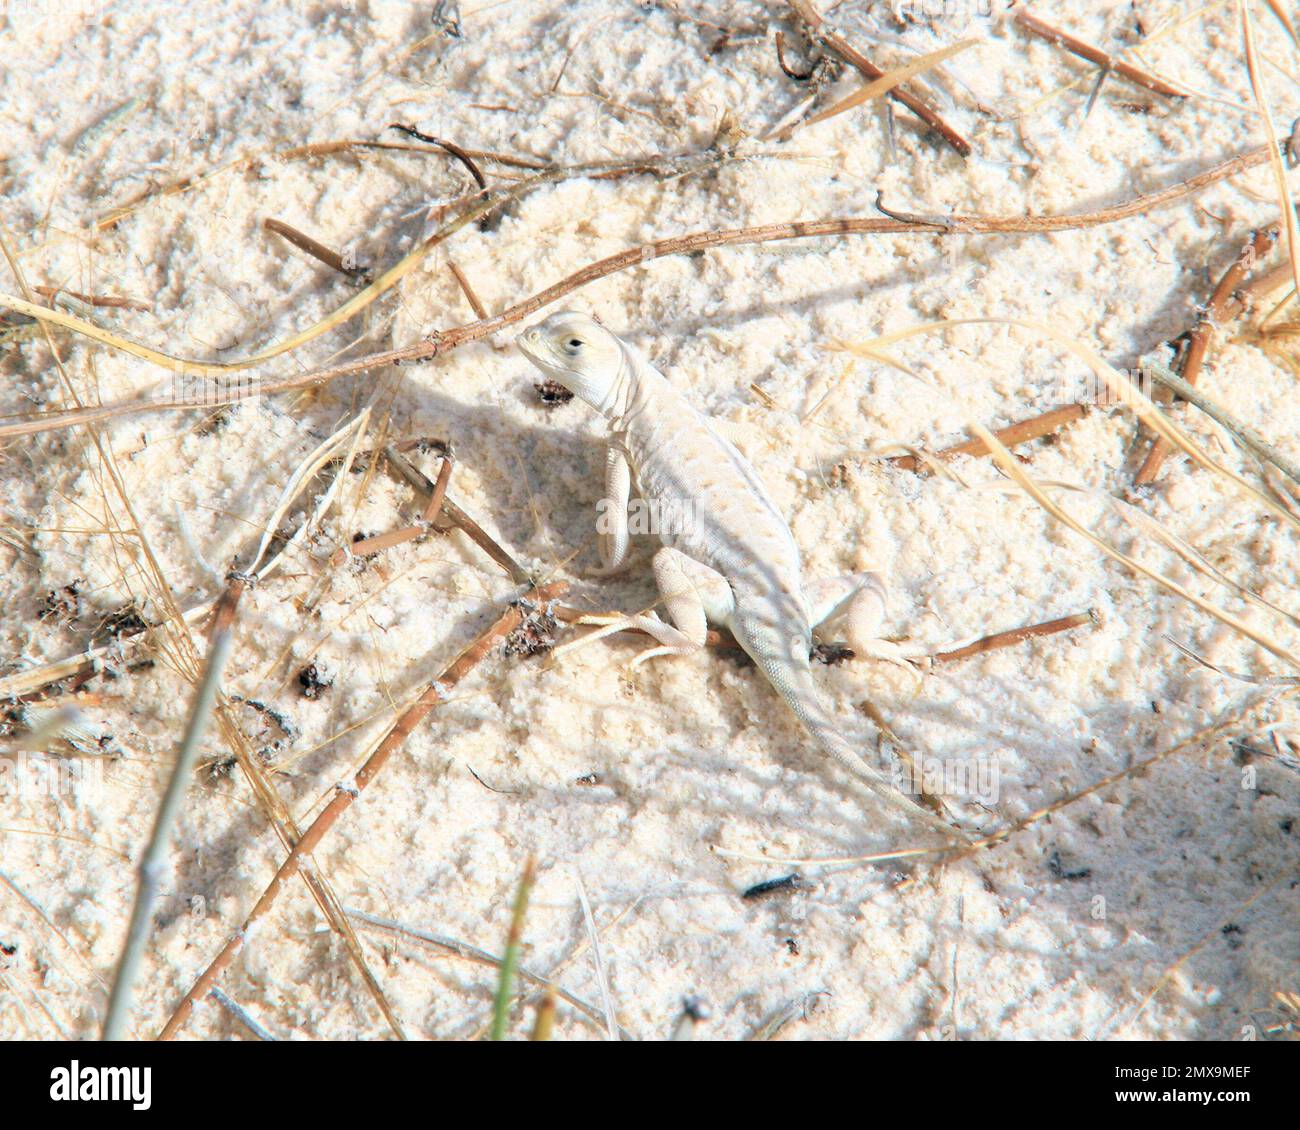 rare bleached earless lizard in white sand dunes Stock Photo